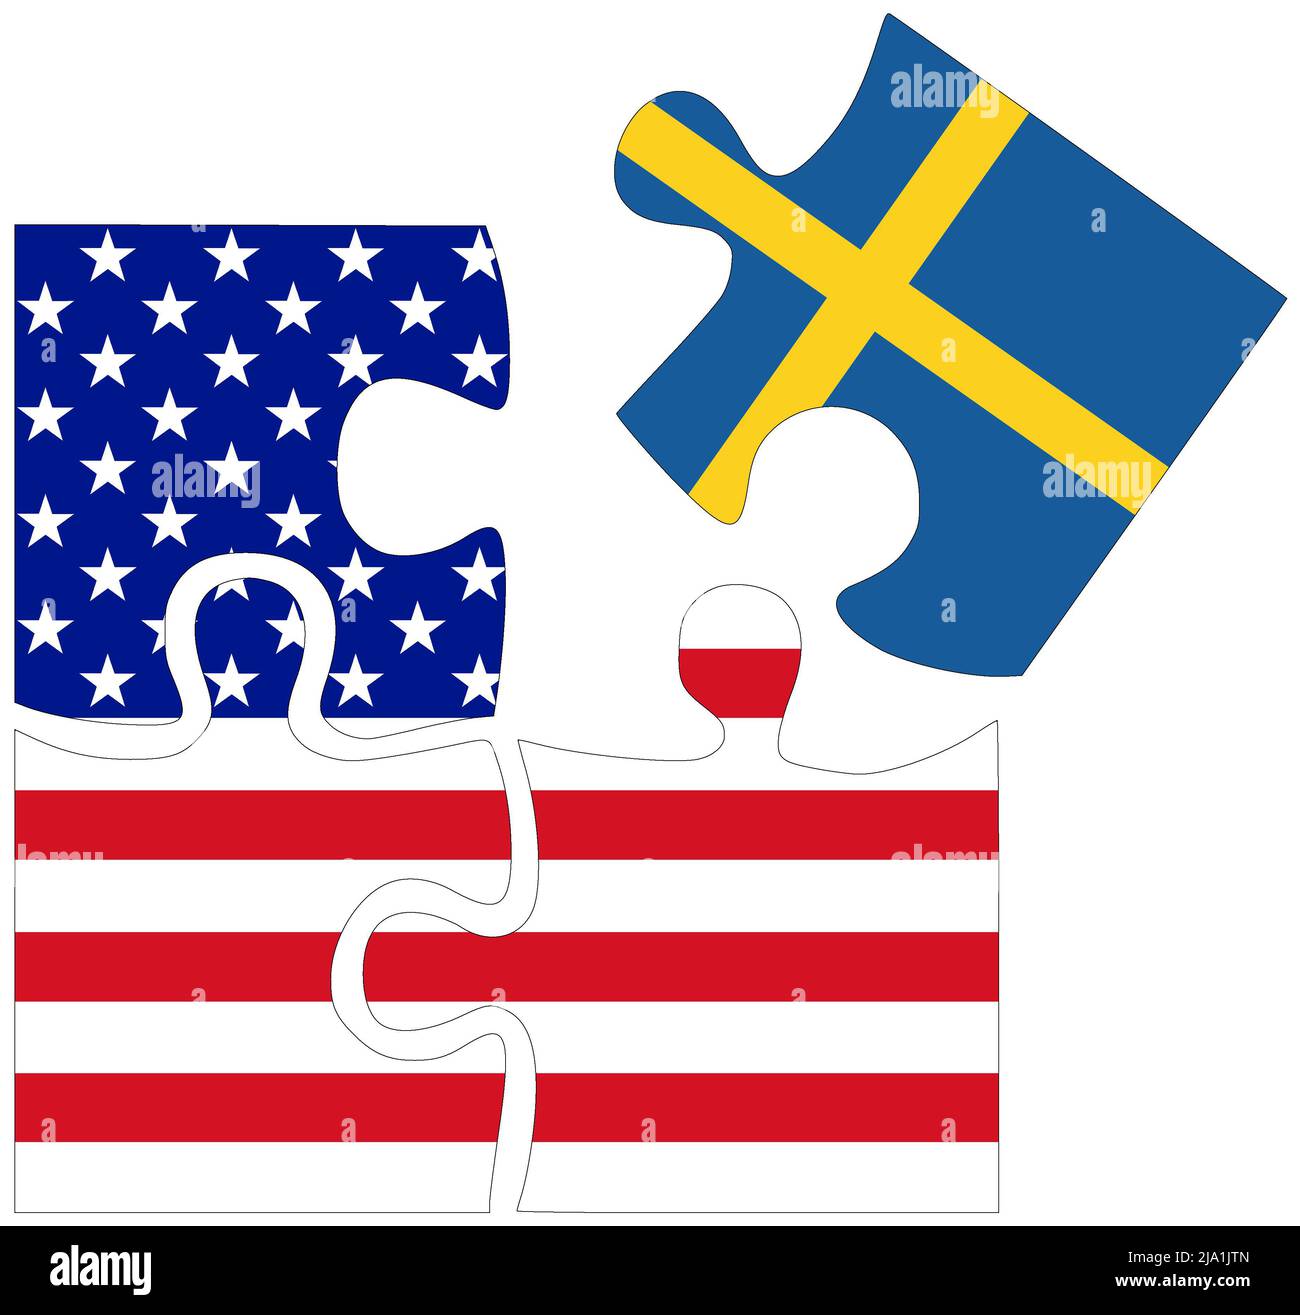 USA - Sweden : puzzle shapes with flags, symbol of agreement or friendship Stock Photo